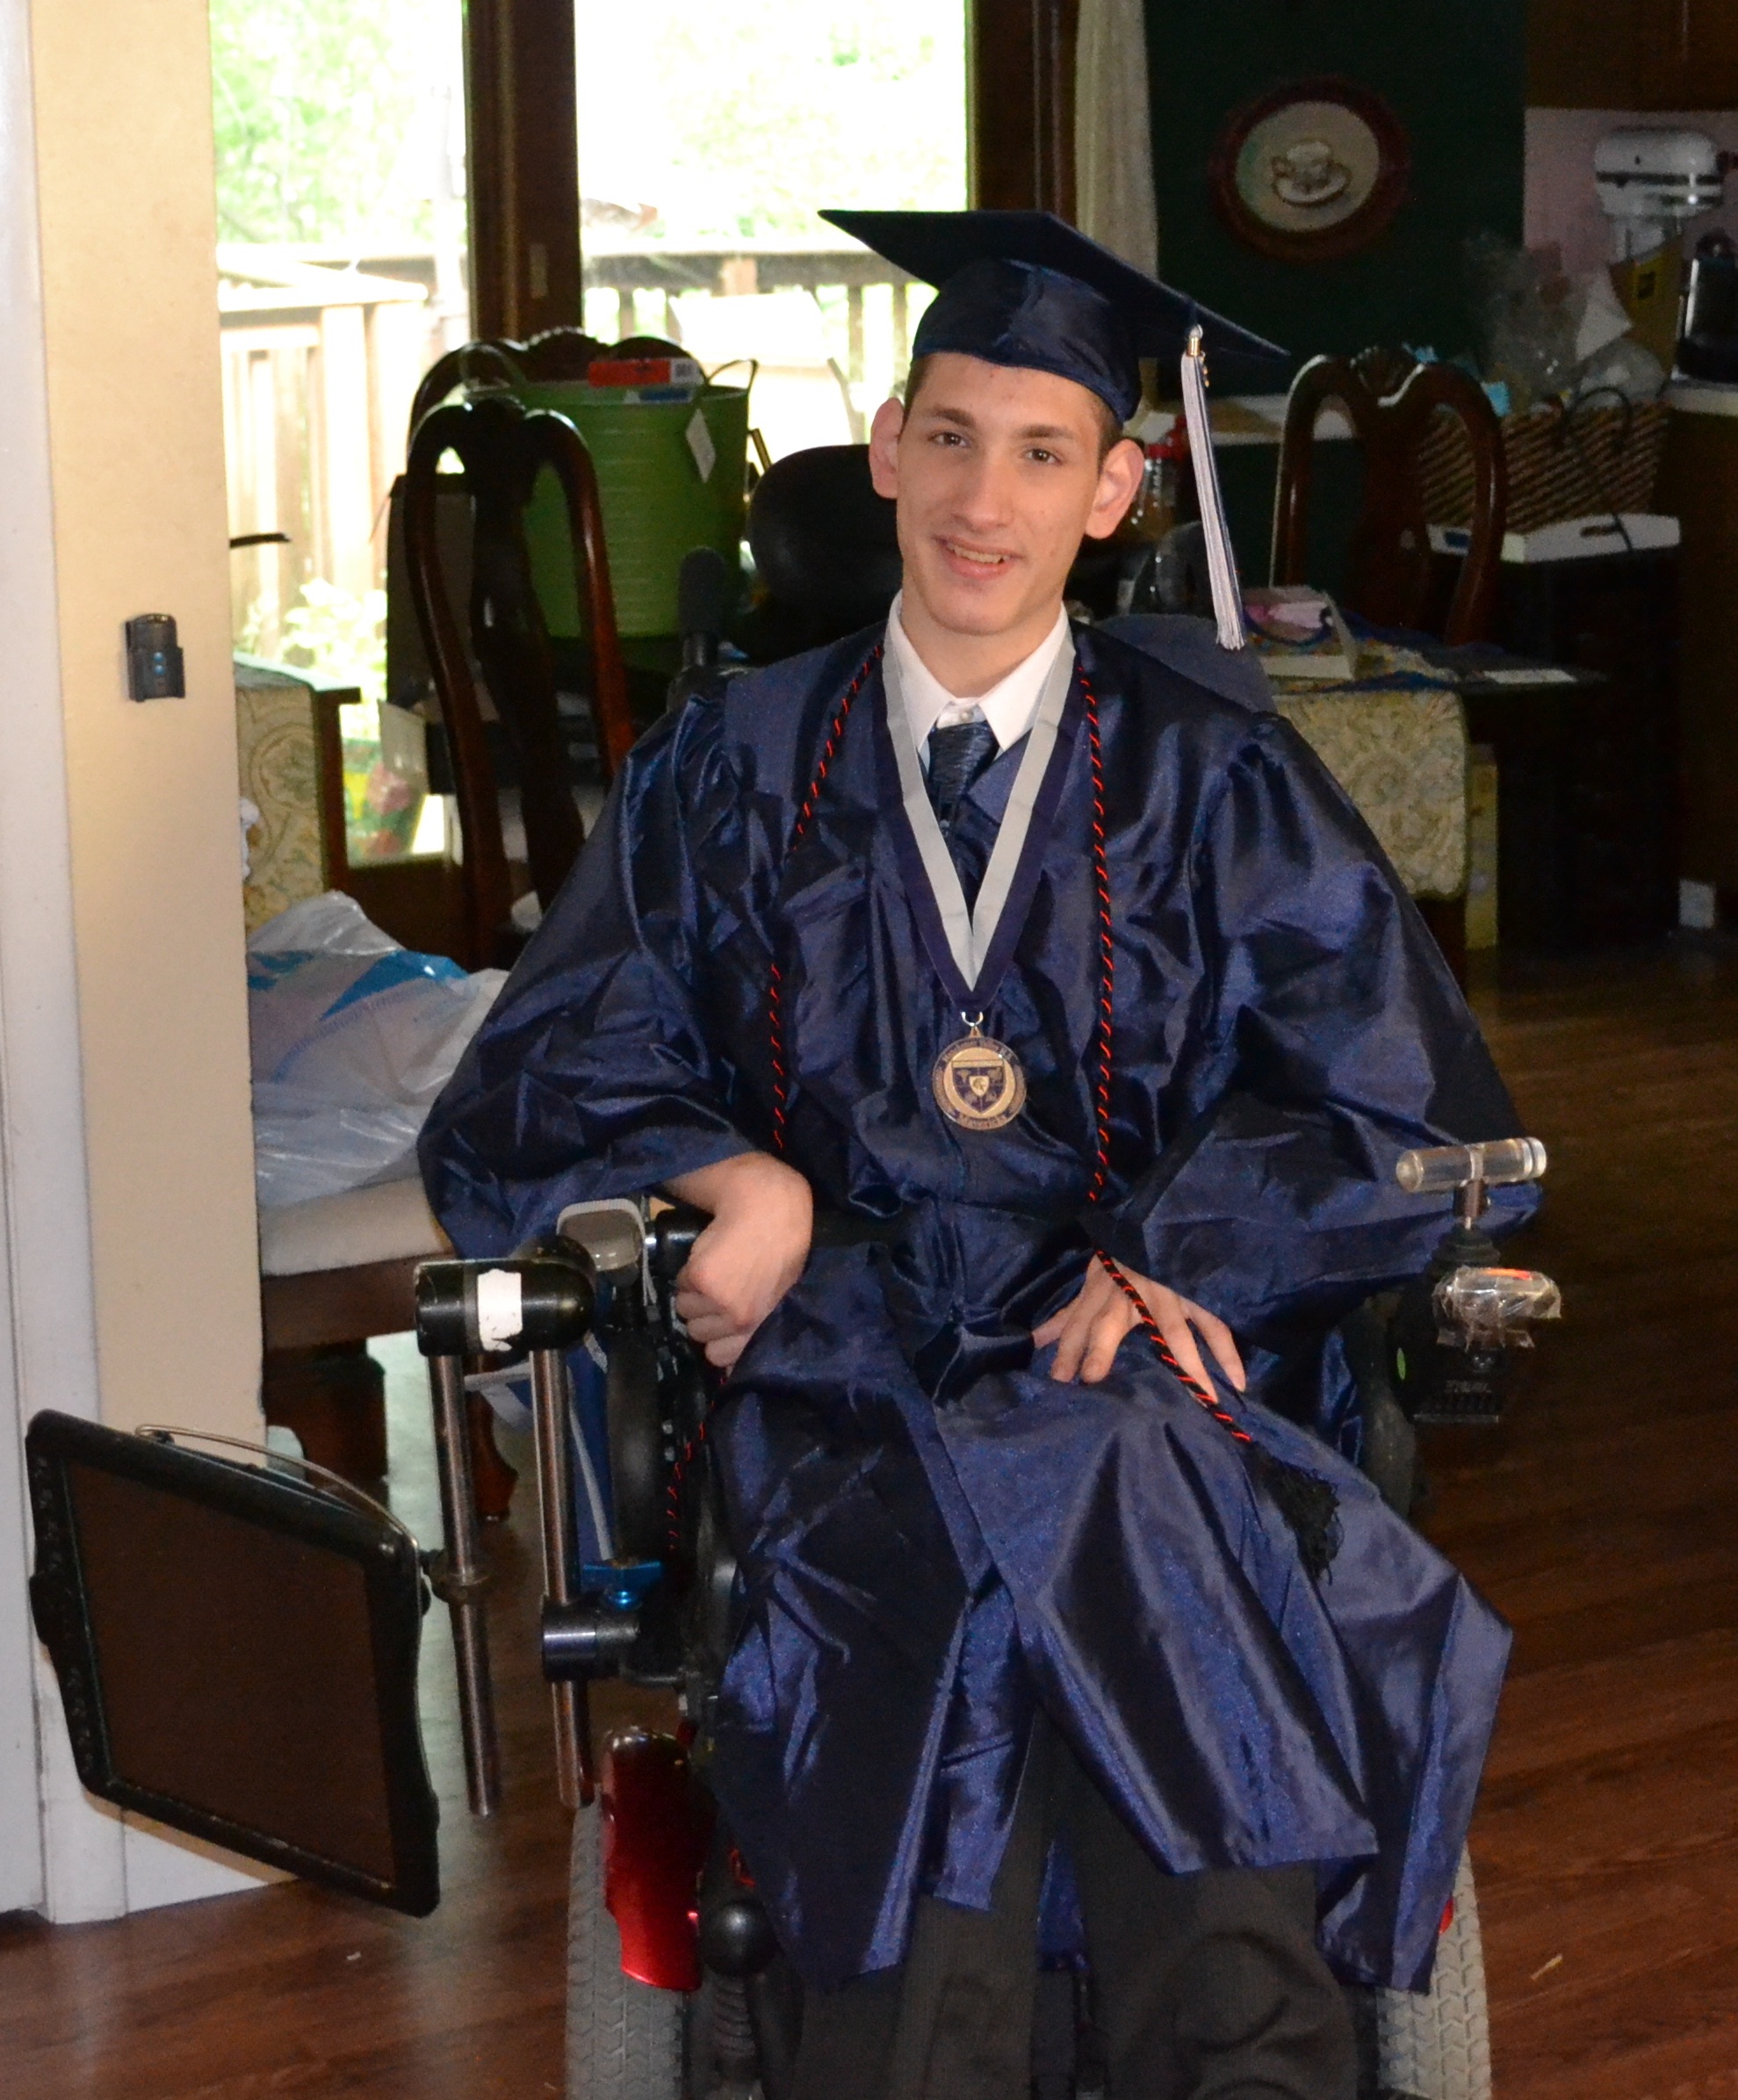 Student in wheel chair wearing a graduation cap and gown.